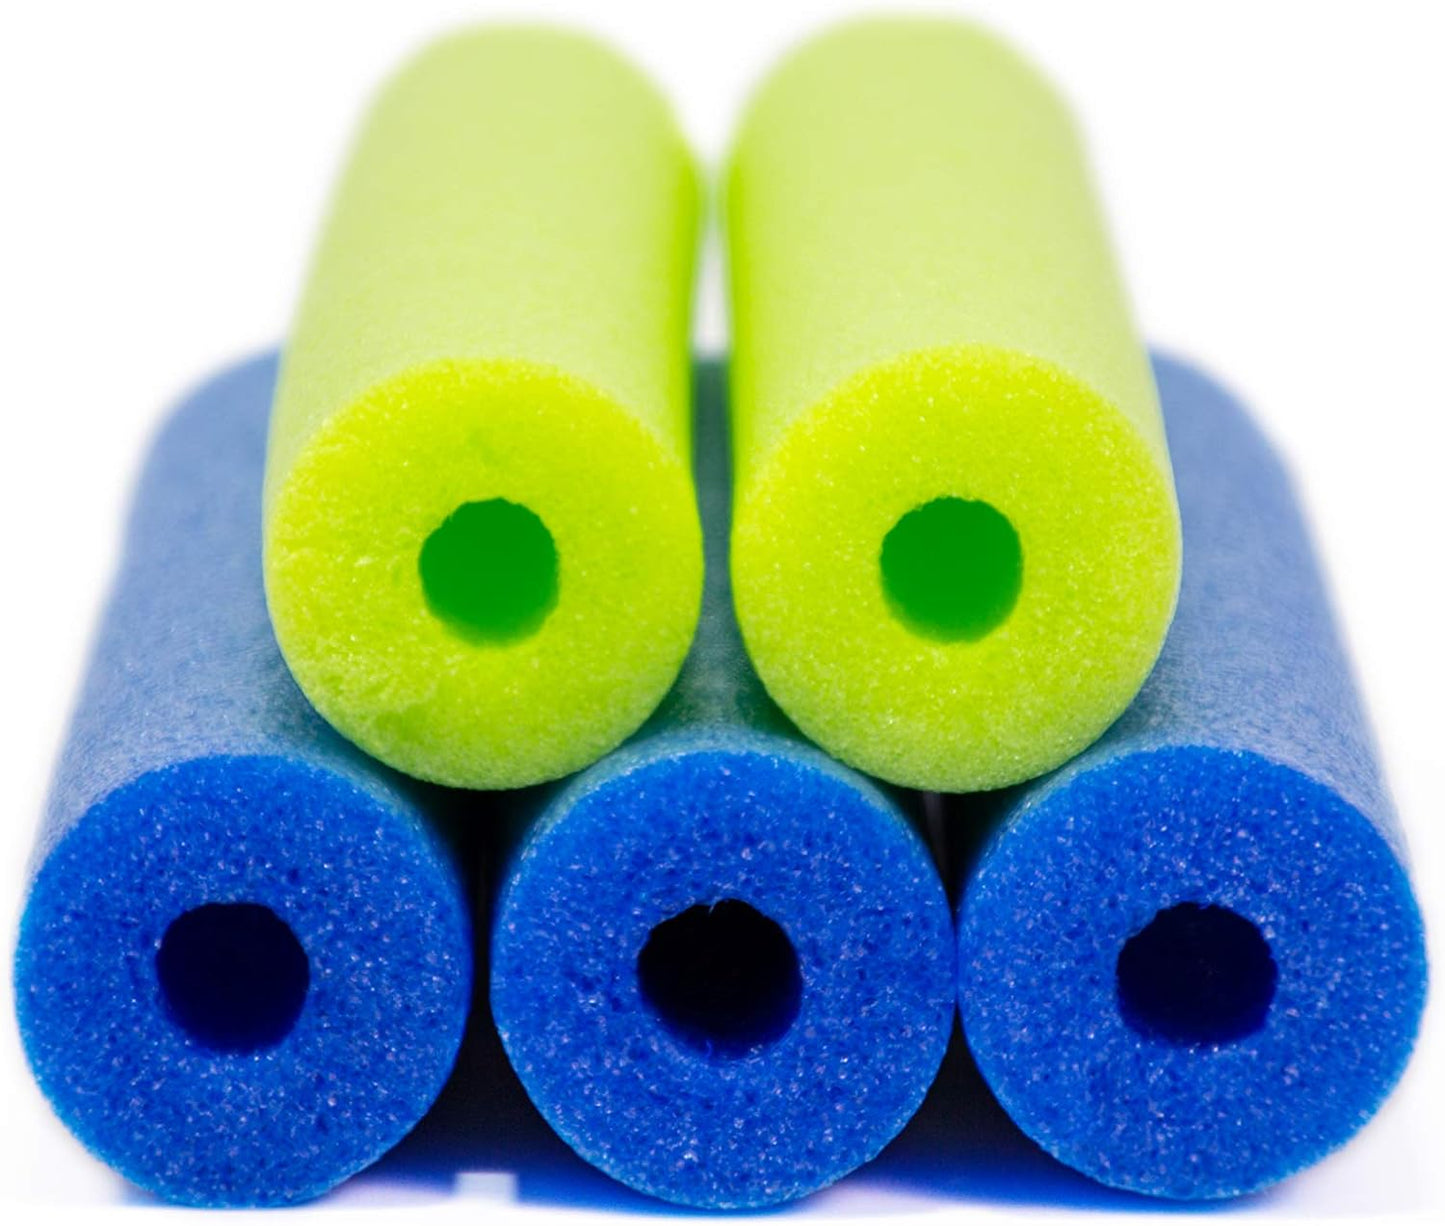 Pool Noodles,  5 Pack of 52 Inch Hollow Foam Swim Noodles, Bright Foam Noodles for Swimming, Floating and Craft Projects